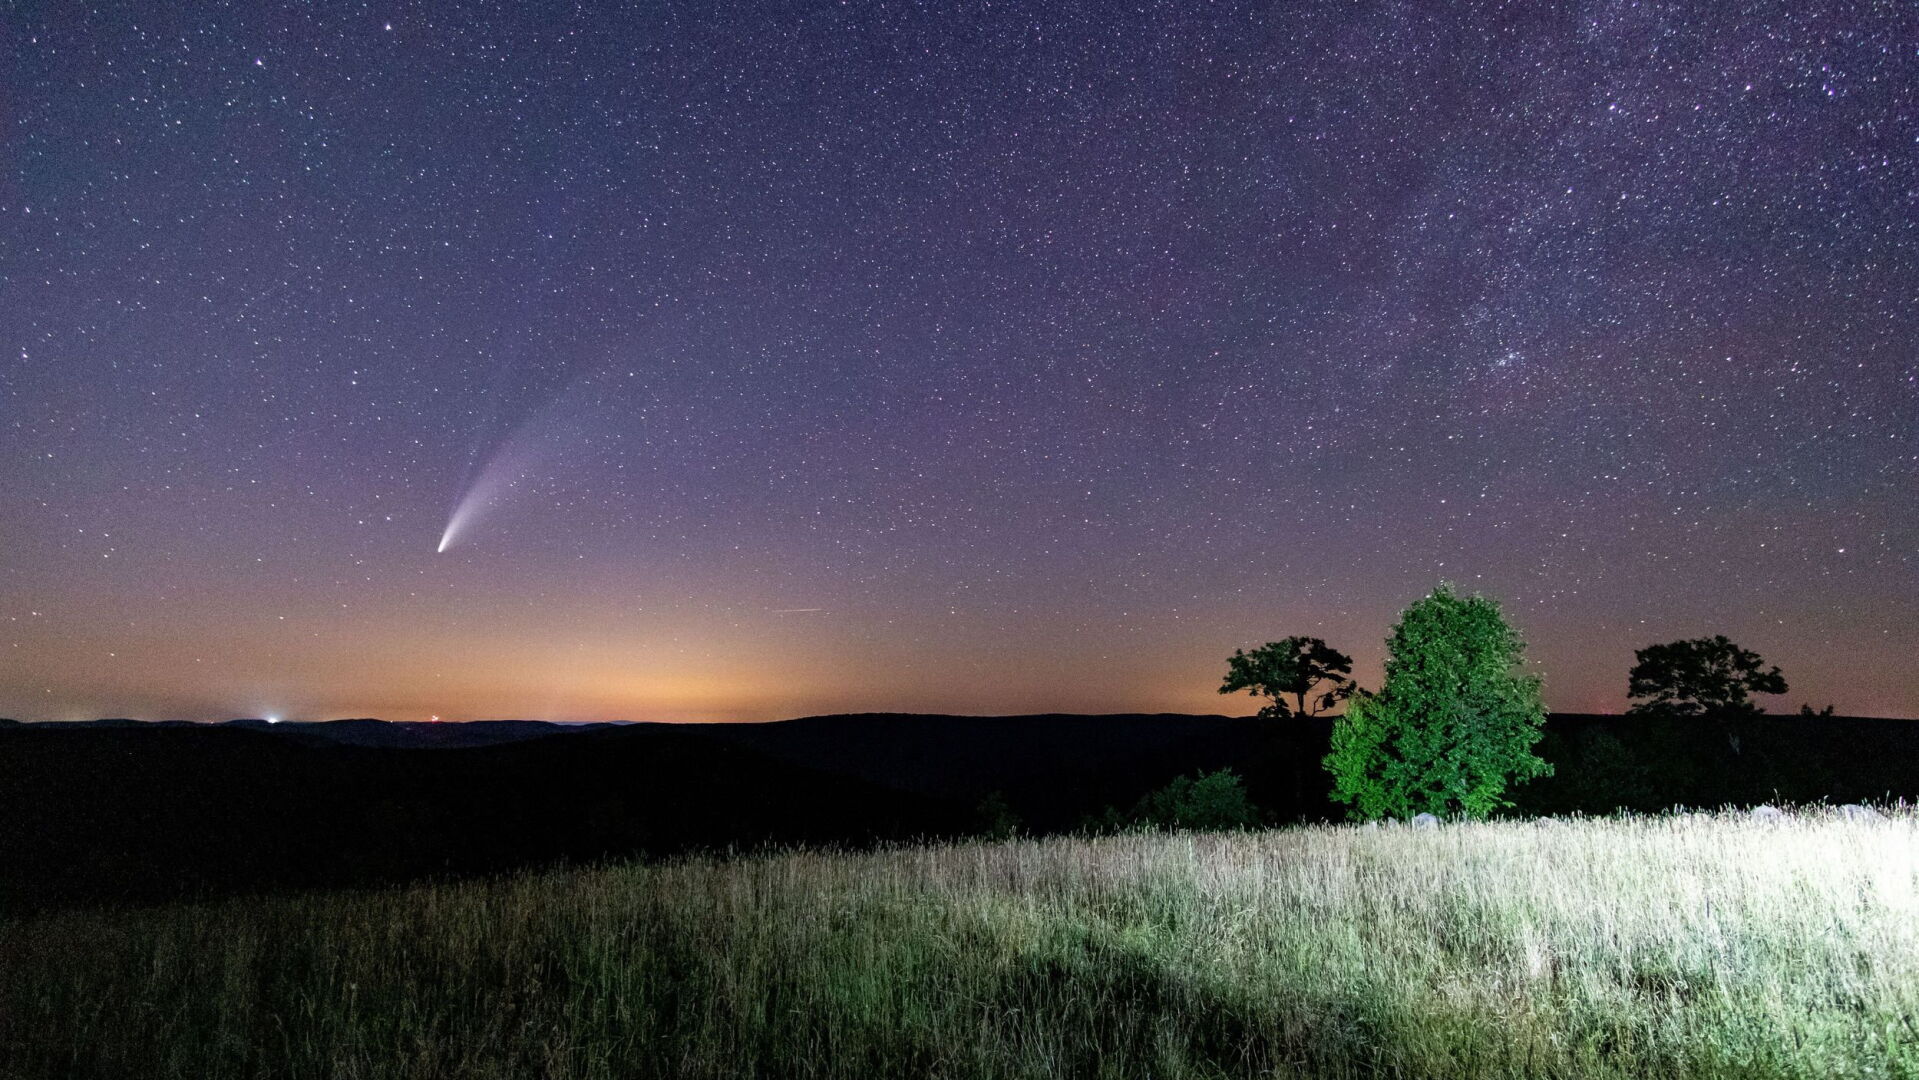 Environmental groups, residents battle light pollution in effort to save night sky in Pa image